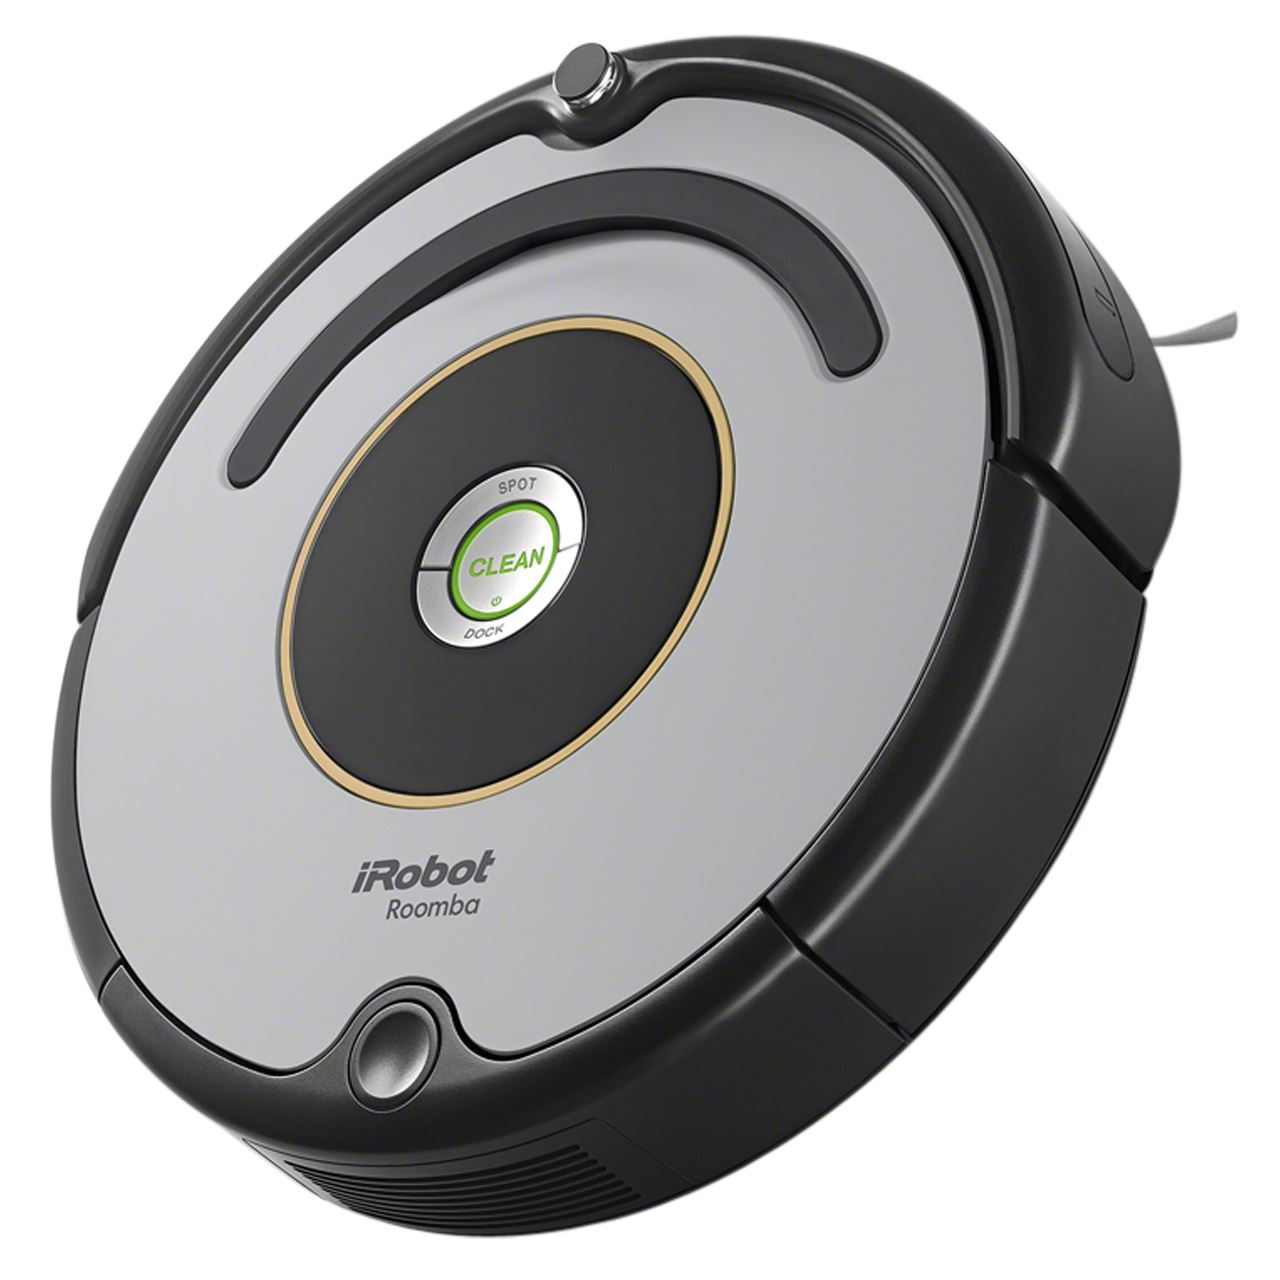 Browse deals on IRobot 616 Floorcare | Delivery Across Newquay | Dimensions